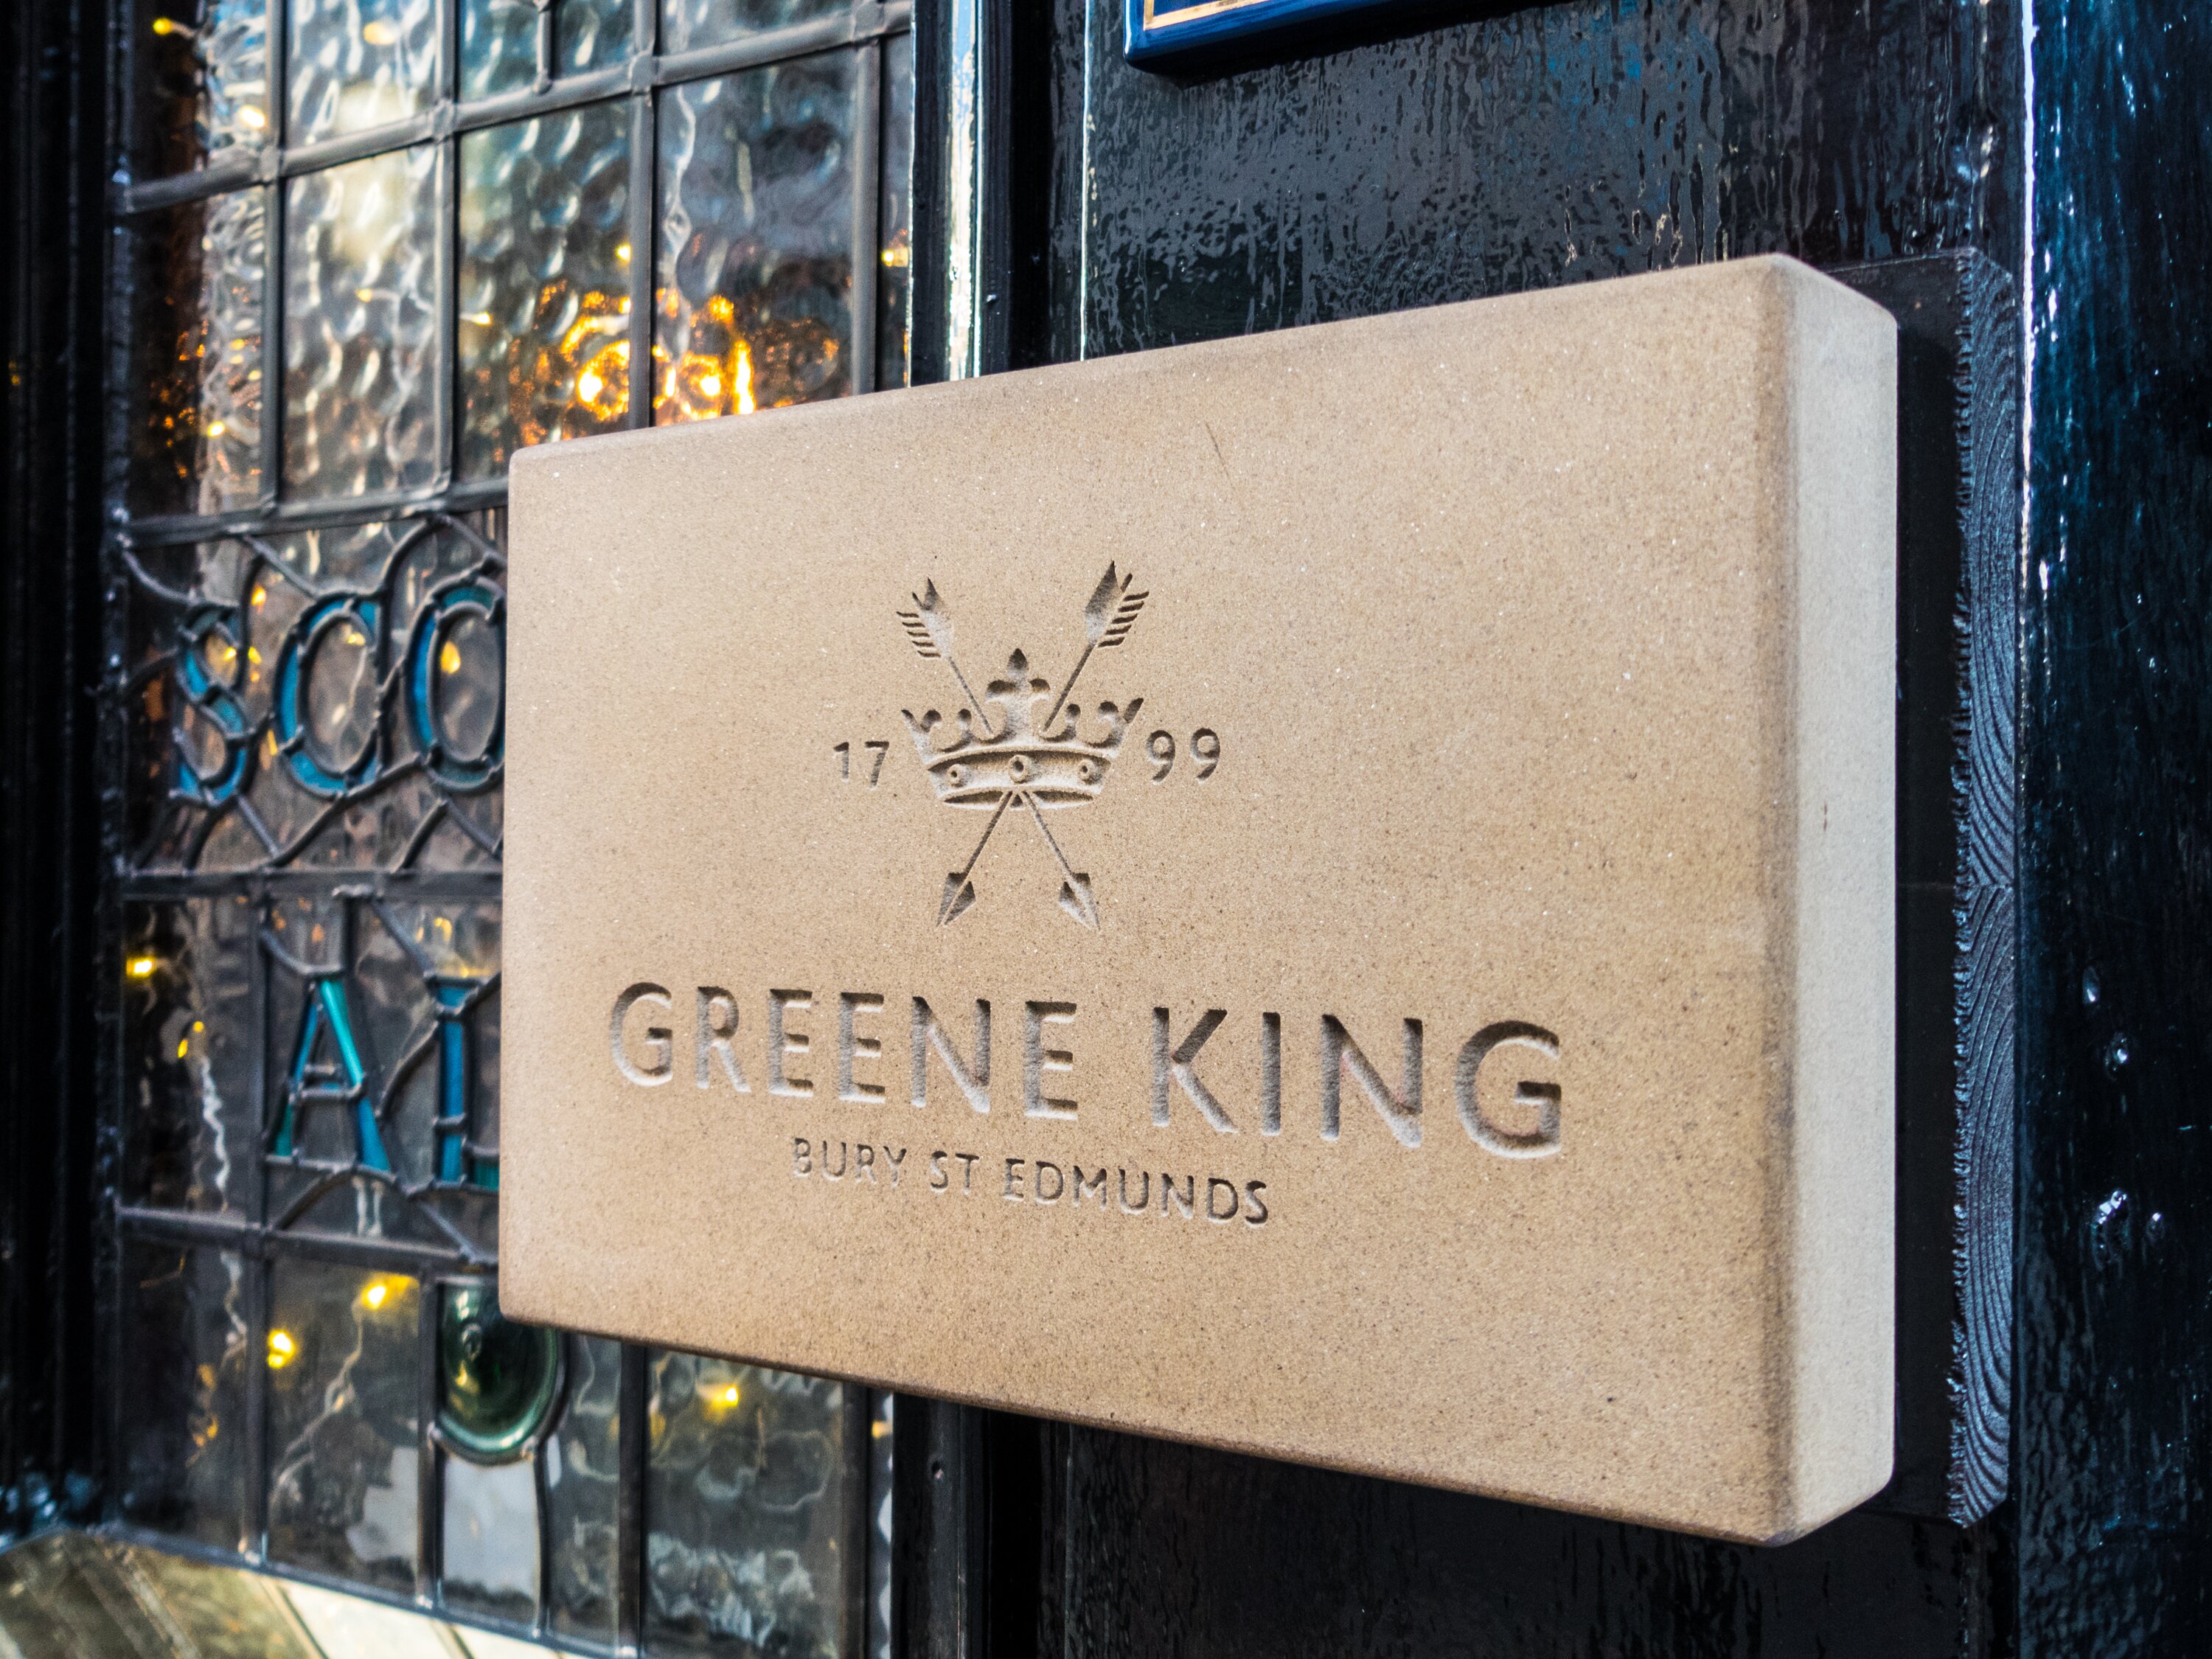 Greene King pays damages after Irish Travellers refused service at pub